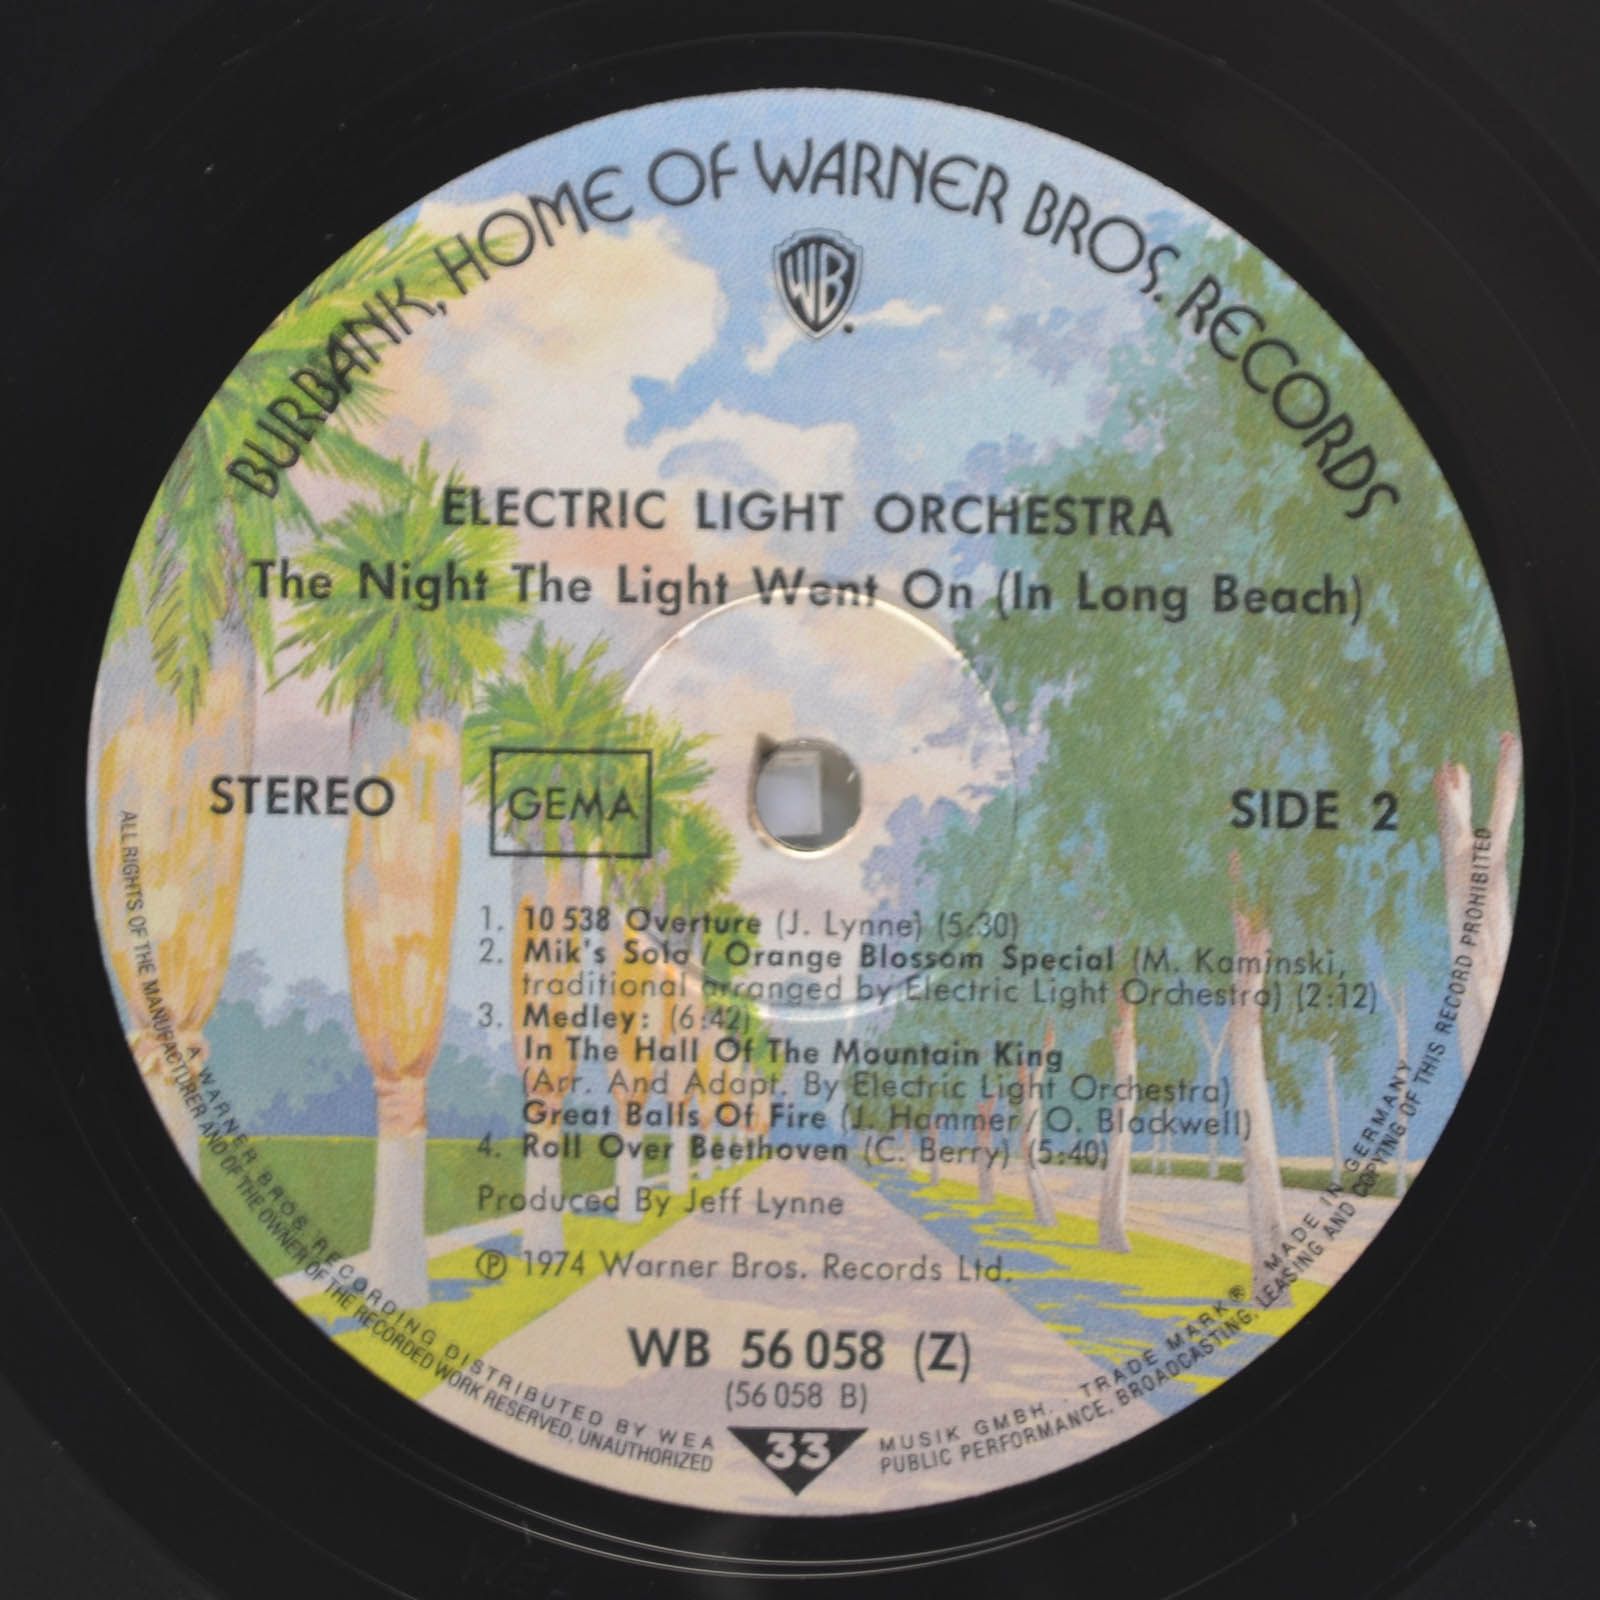 Electric Light Orchestra — The Night The Light Went On (In Long Beach), 1974